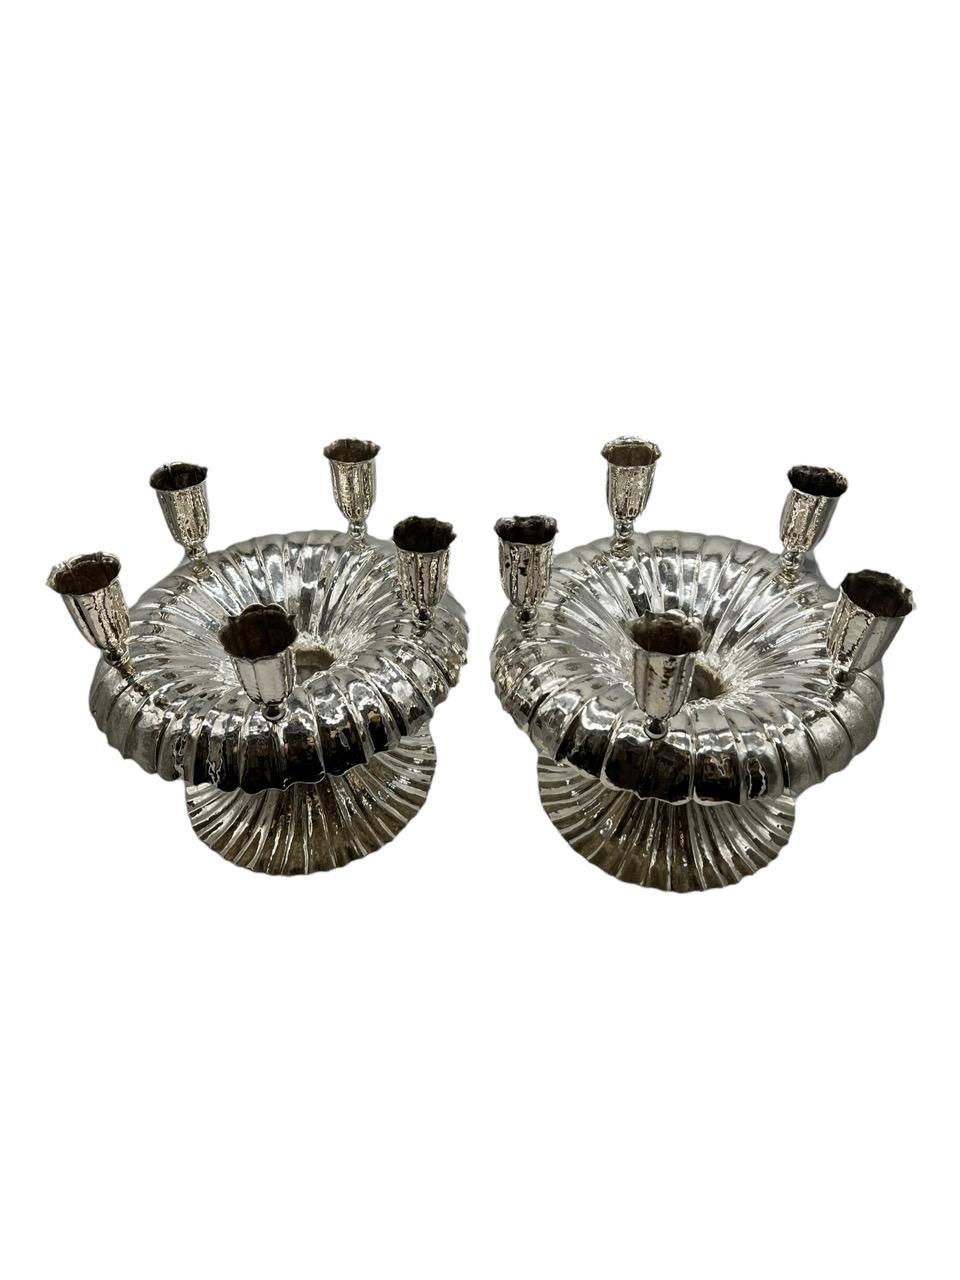 Circa 1925 pair of Austrian silver five-light candelabra by artist, Frank Brüder, From Vienna. Each circular with spot hammered surface, the lobed everted rim with scalloped edge and on a spreading circular foot, supporting five tulip-form sconces